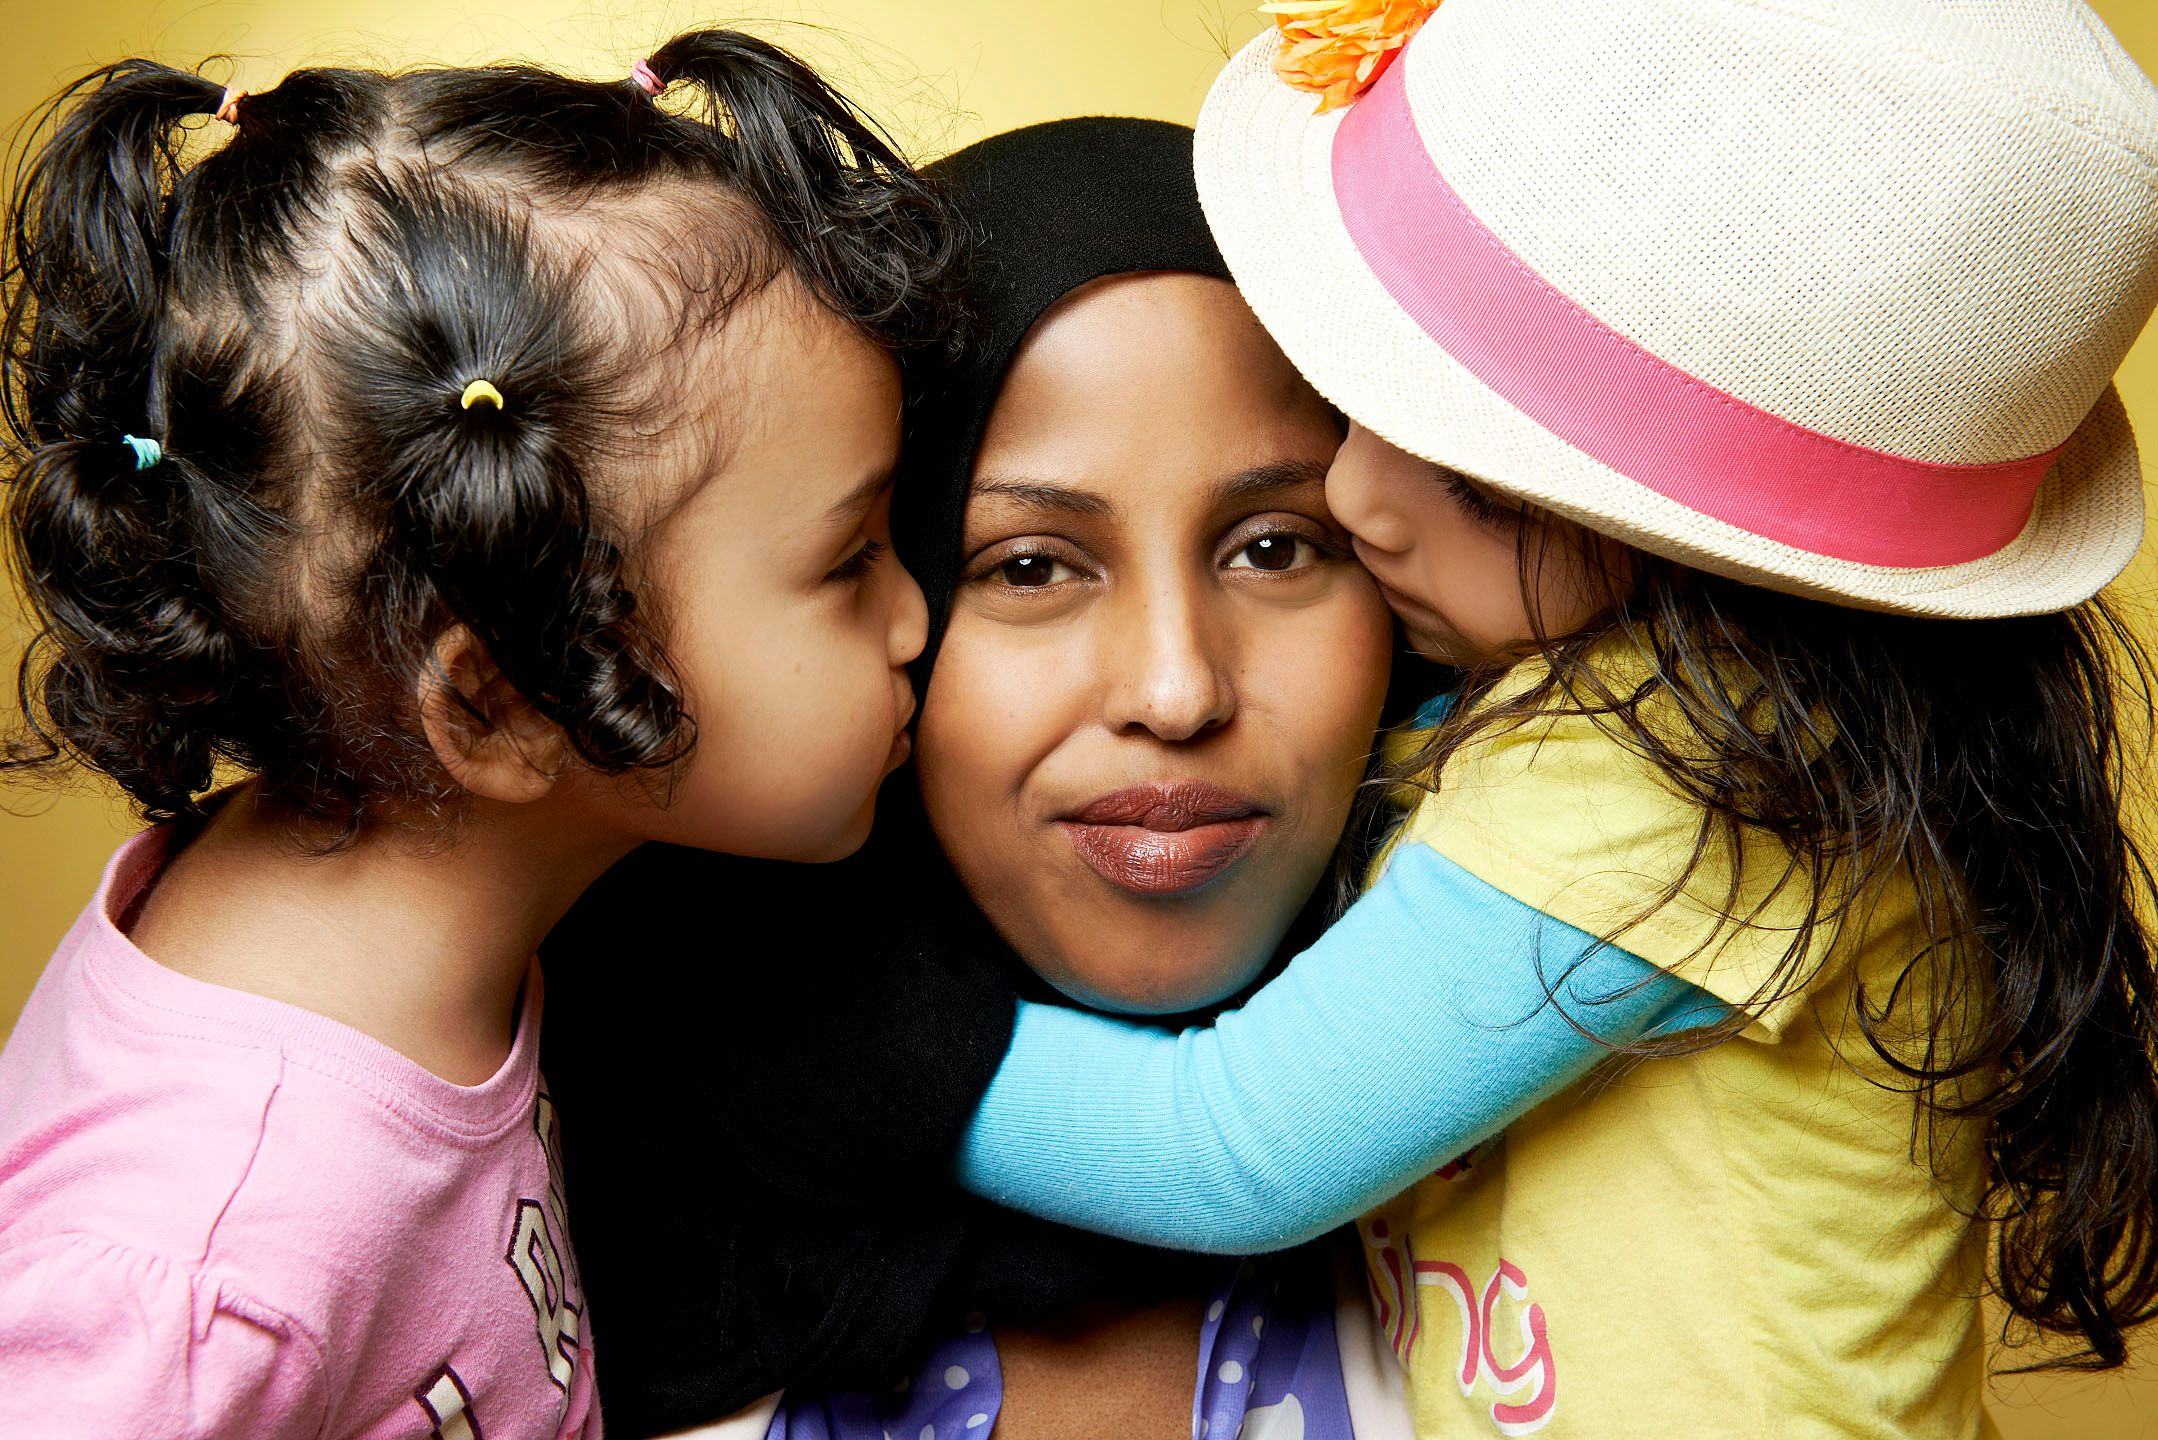 Ladan Abdi, a brown woman with long, straight black hair, smirks at the camera, as she is hugged around the neck by her two young daughters.